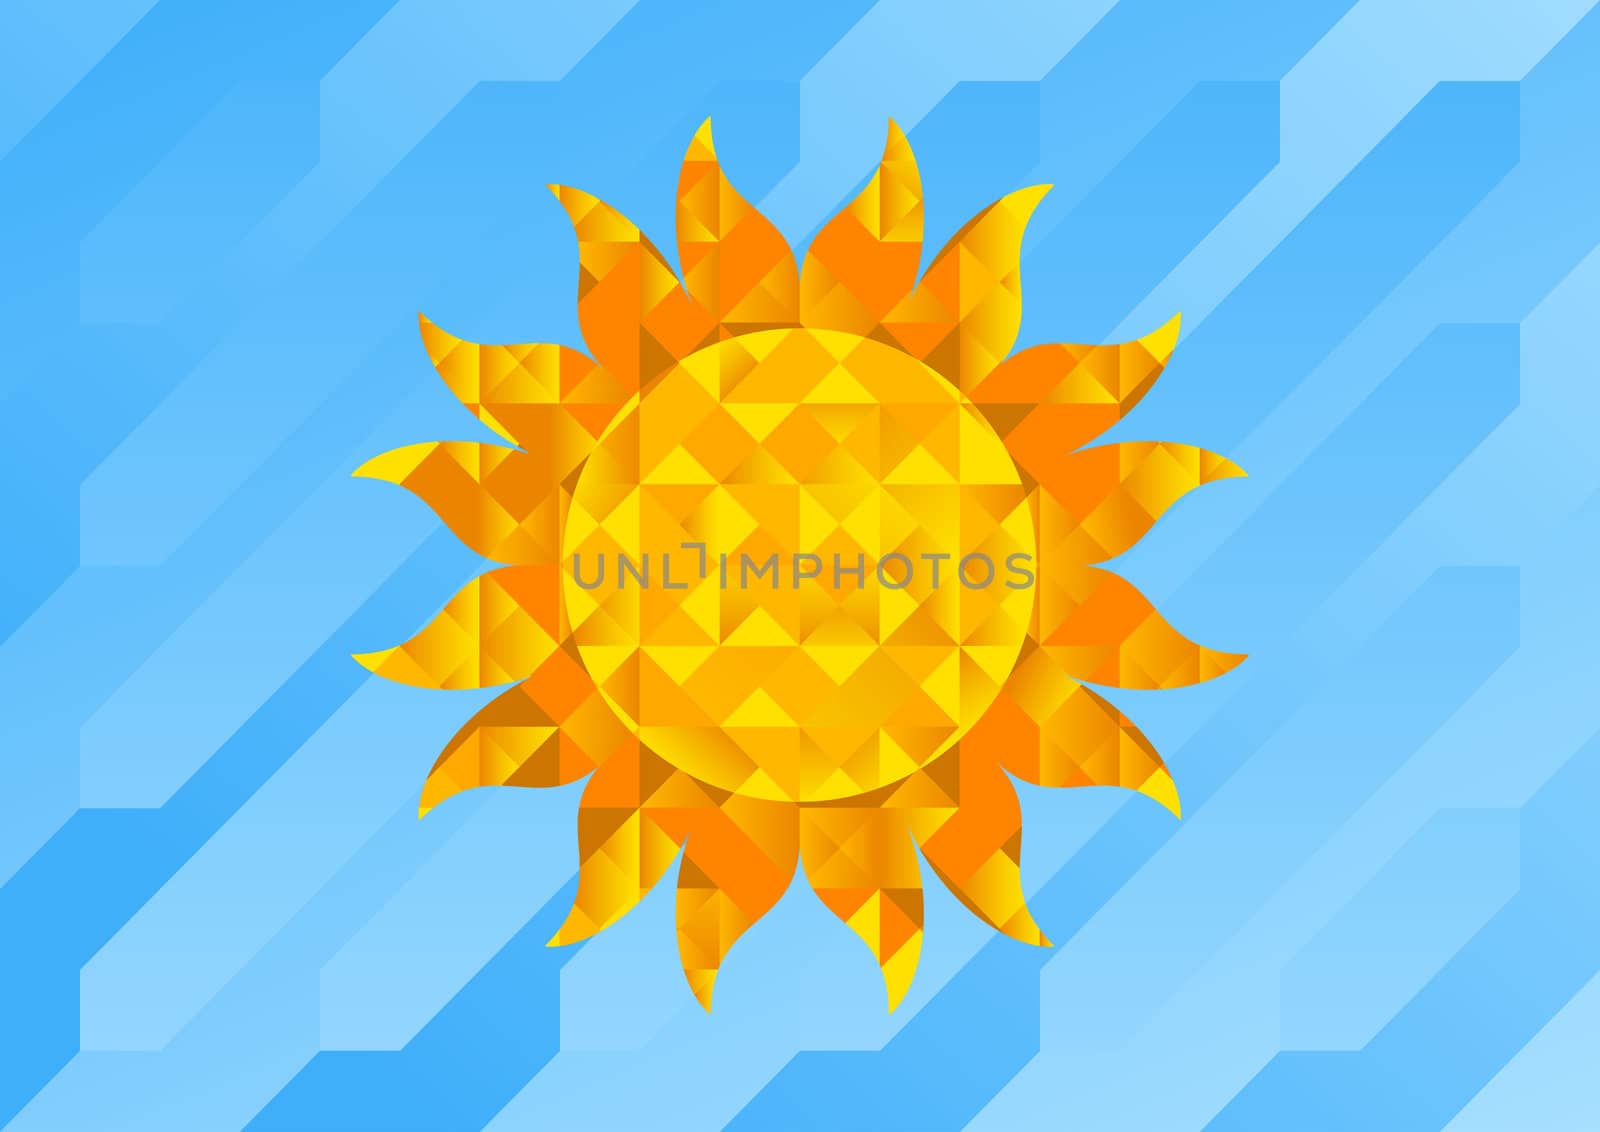 Bitmap Illustration of Abstract Sun of Geometric Shapes